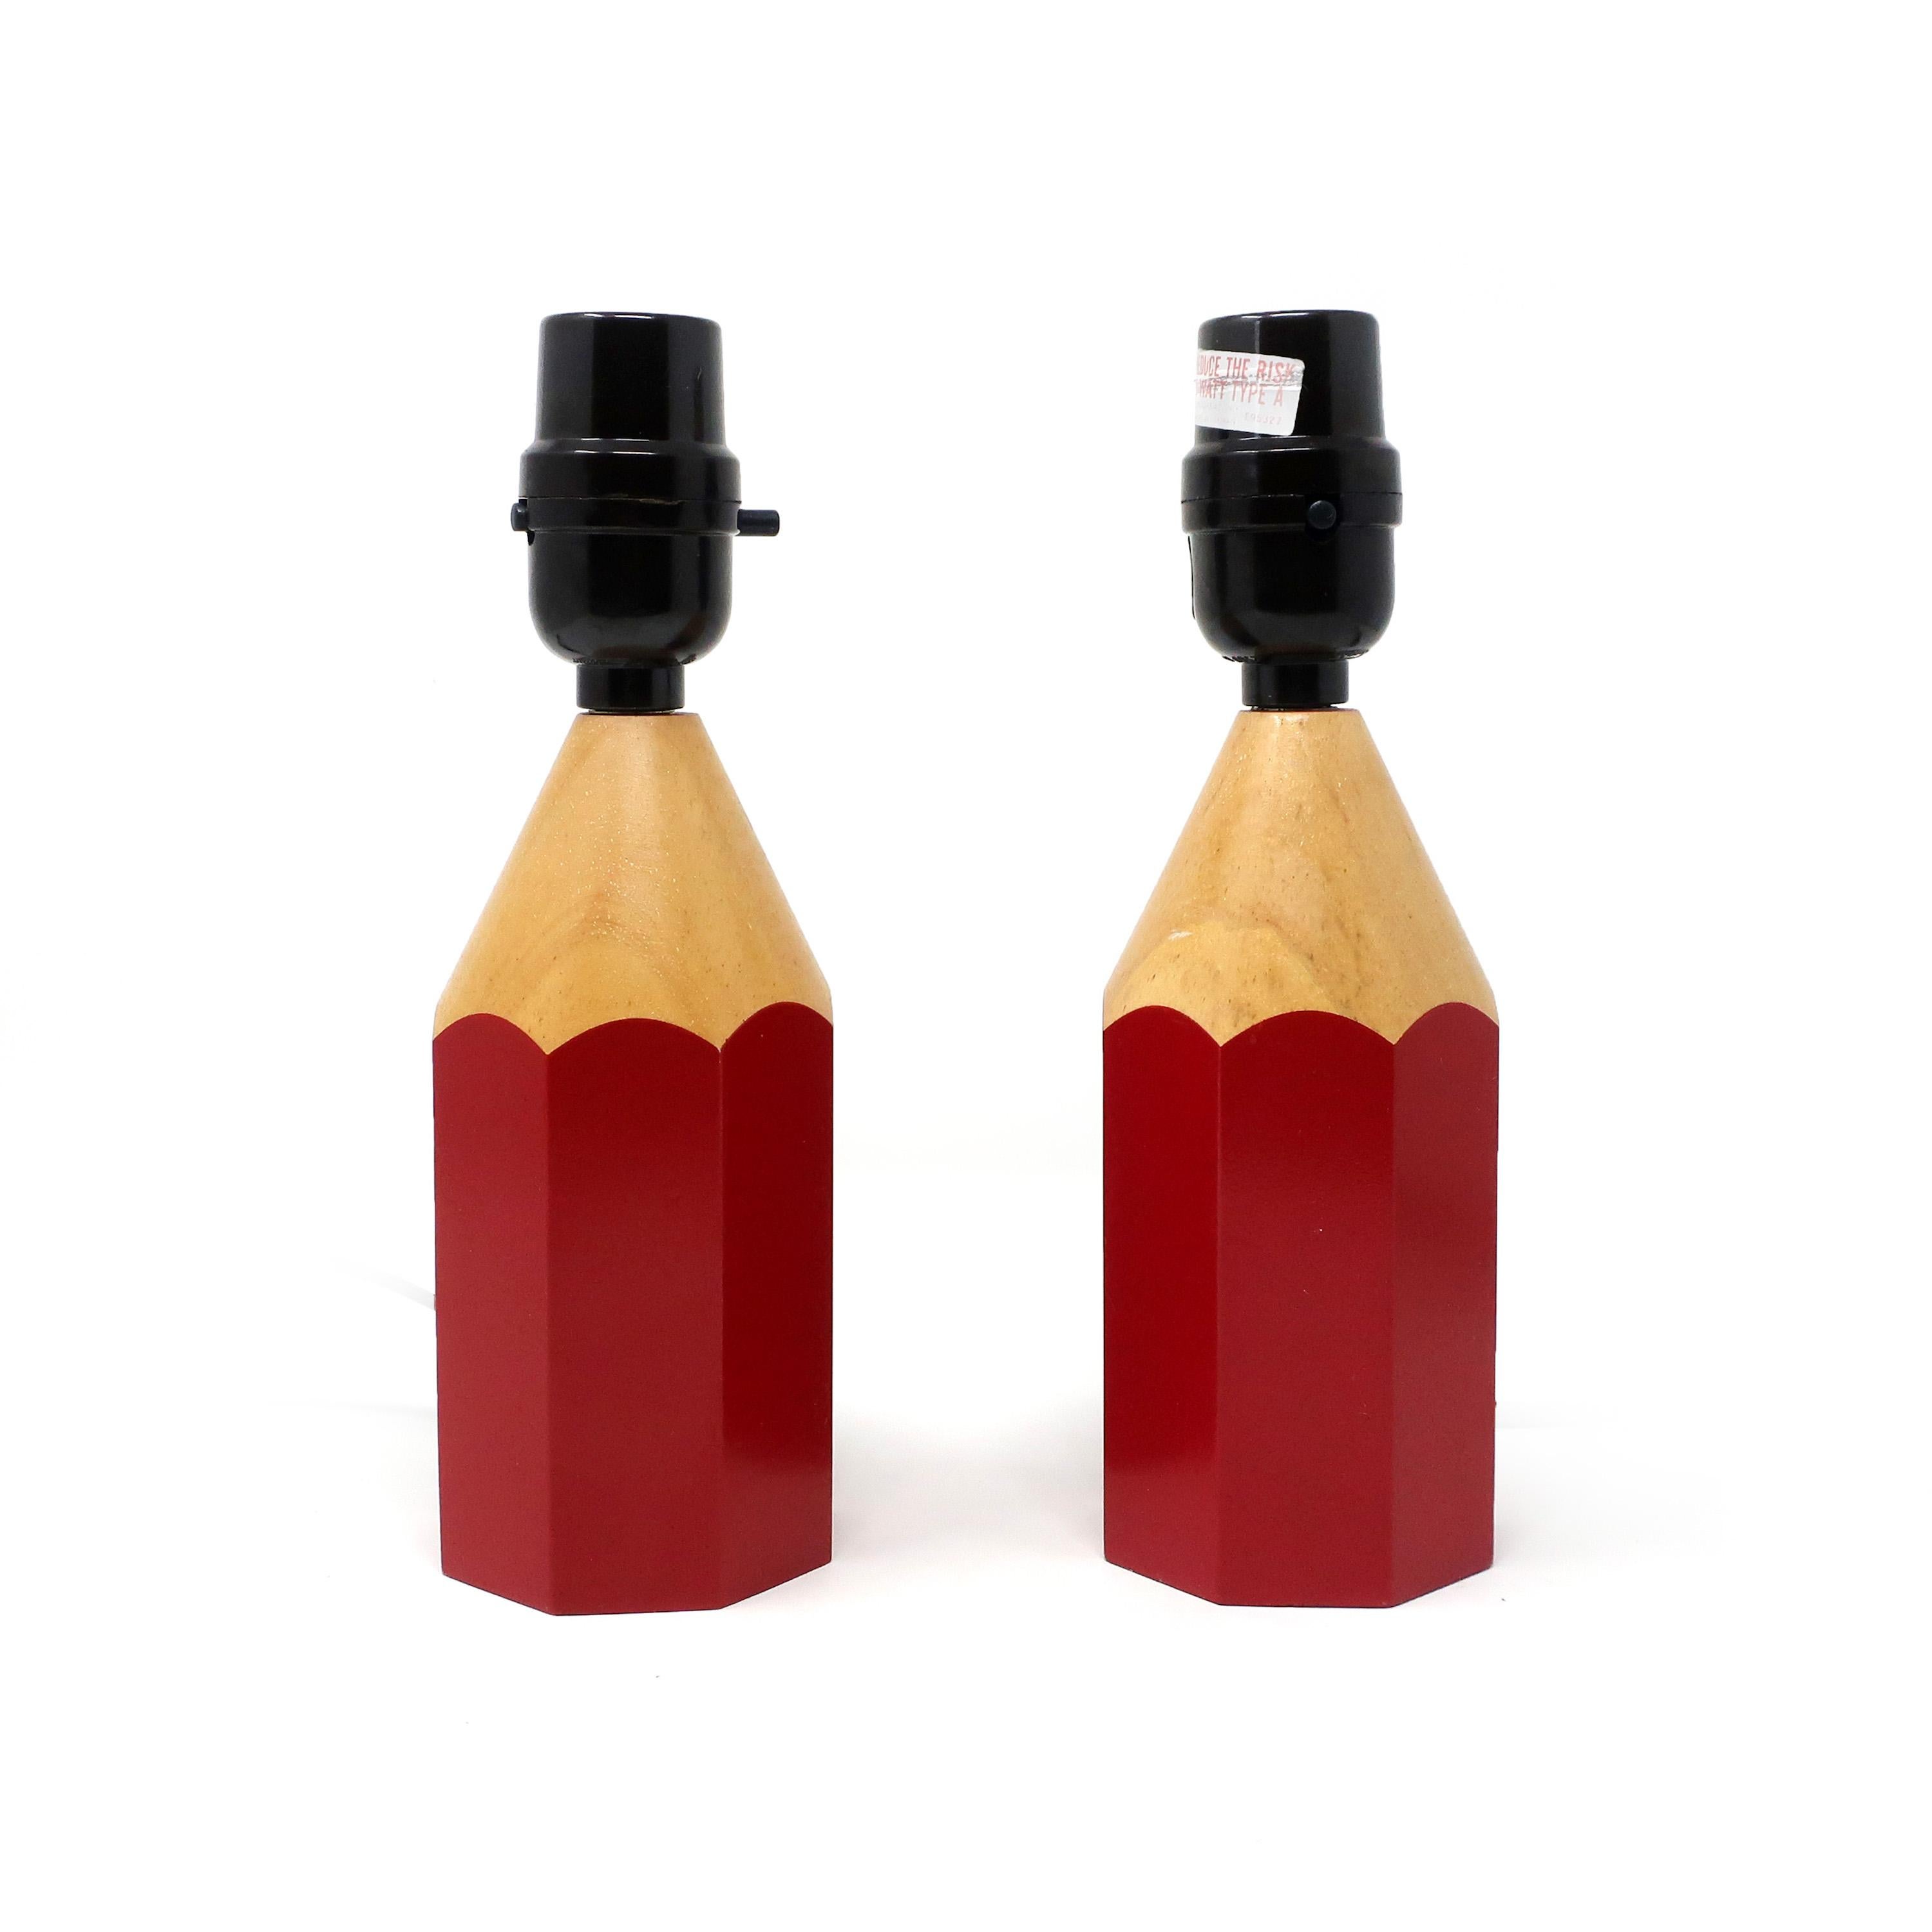 A pair of vintage Lightolier pencil lamps with original shades. Perfect size for a desk or table lamp and a design fun enough to work anywhere in your home, for the living to an office to kids’ bedrooms. Base is red pencil shape with wood tips,